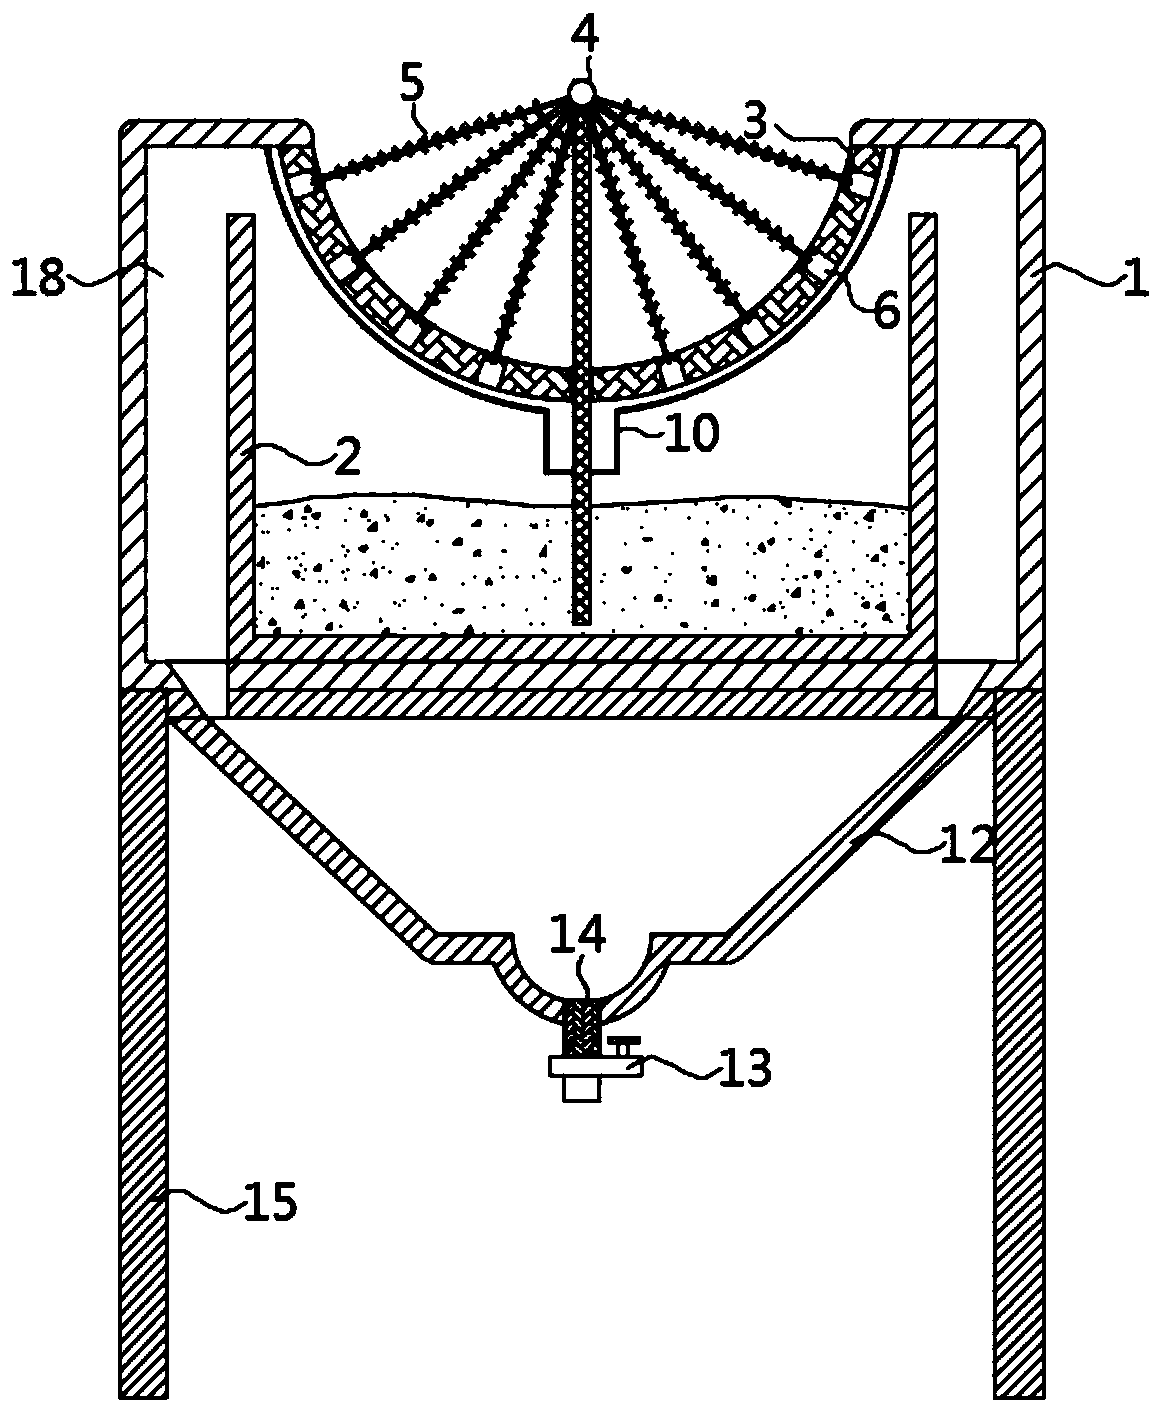 Water resource recyclingand utilization device for arid areas